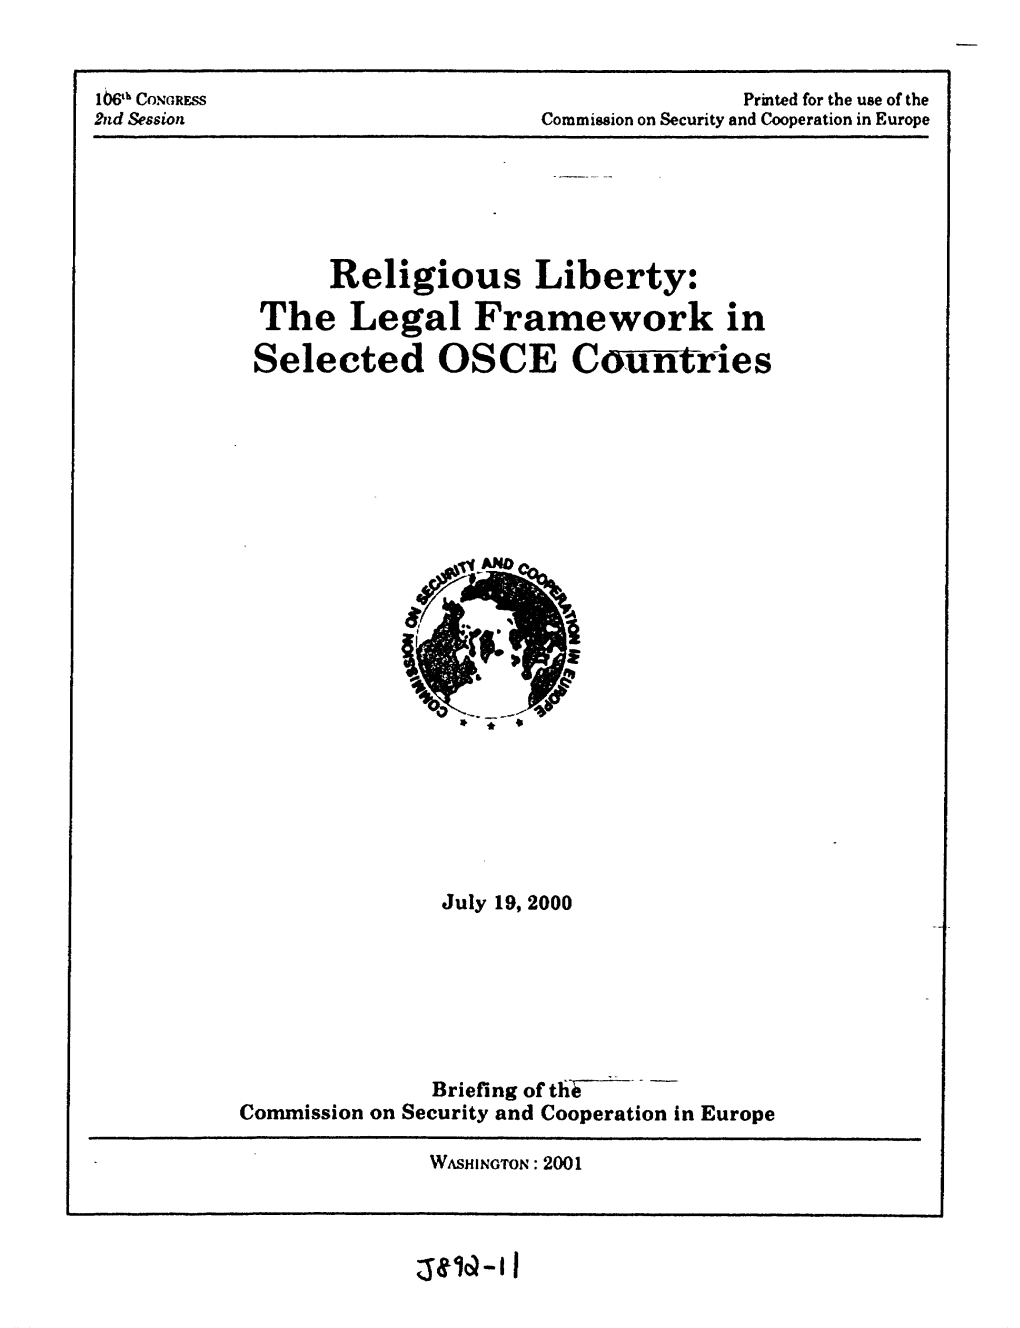 Religious Liberty: the Legal Framework in Selected OSCE Countries